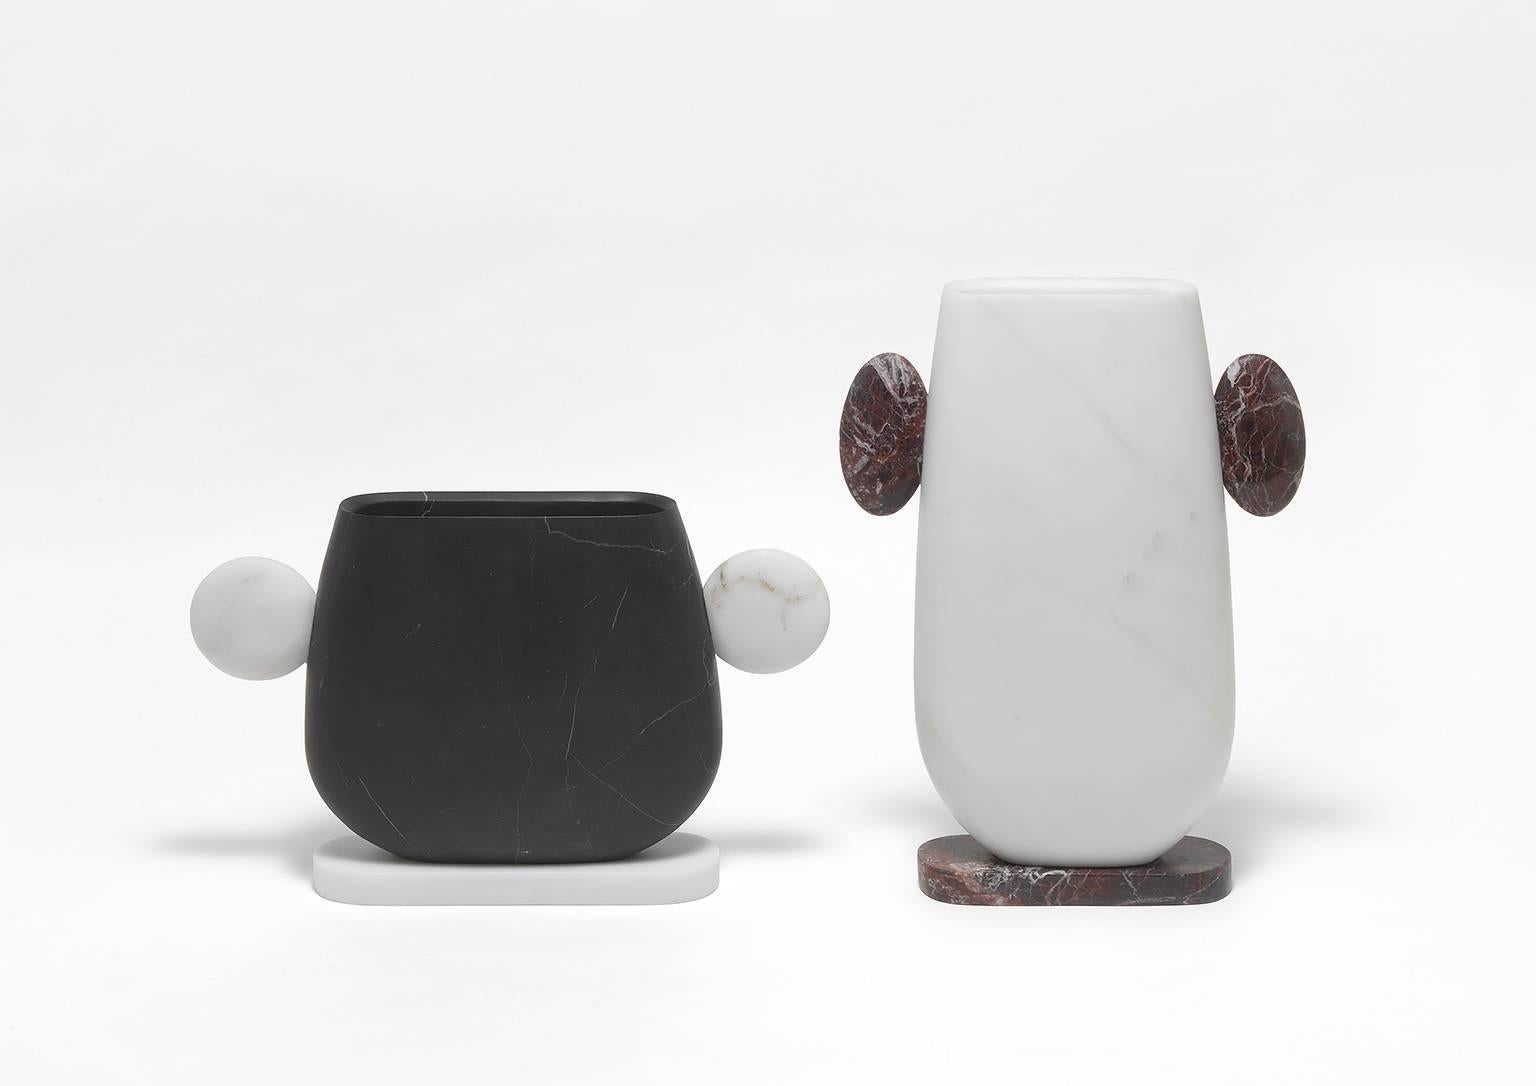 Vase in black marquinia and white michelangelo marble,
Size: 38.2 x 23.4 x 7.3 cm, smooth finishing. Commercial name: Tacca, Homage Collection by the Italian Designer Matteo Cibic. Made in Italy, hand finished.
Originating in Carrara, baroque and